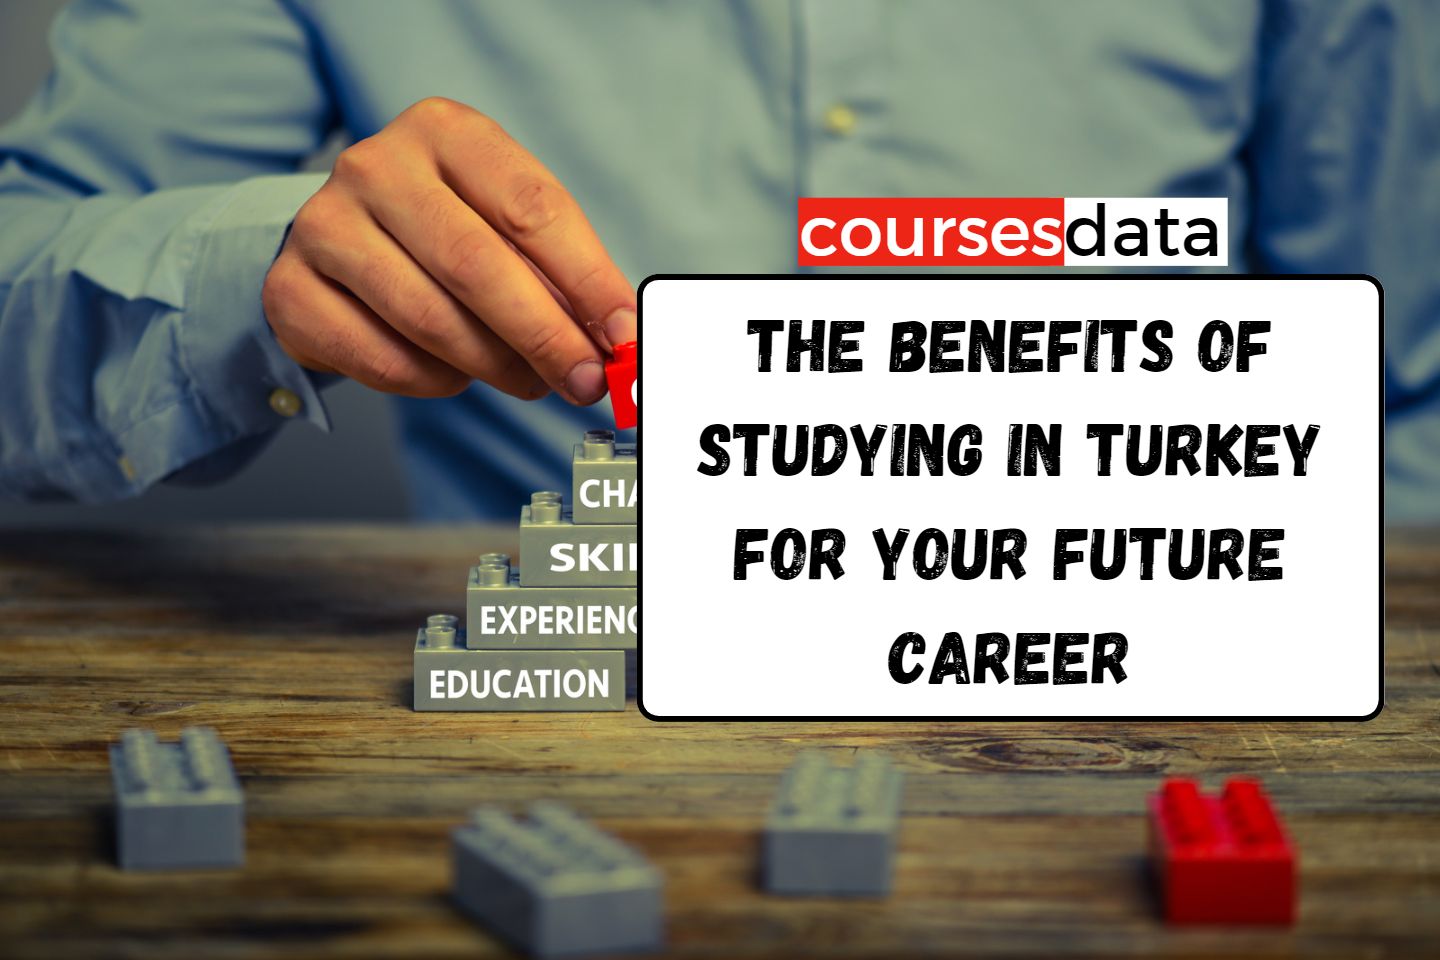 The Benefits of Studying in Turkey for Your Future Career